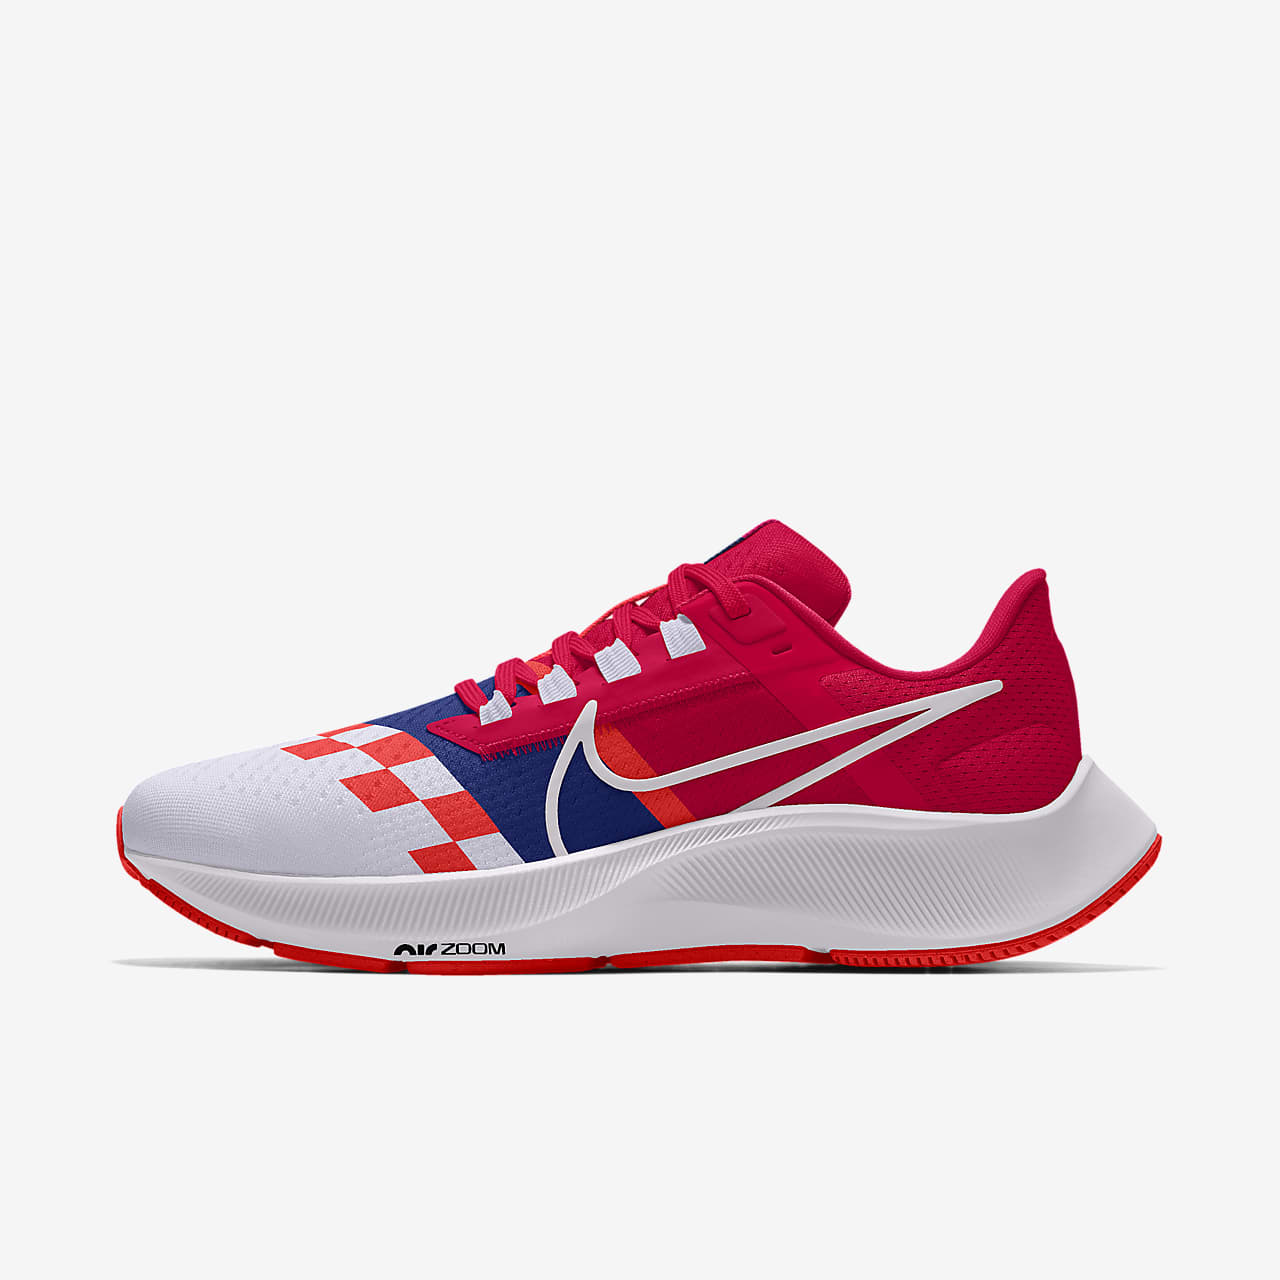 Chaussure de running personnalisable Nike Air Zoom Pegasus 38 By You pour Homme